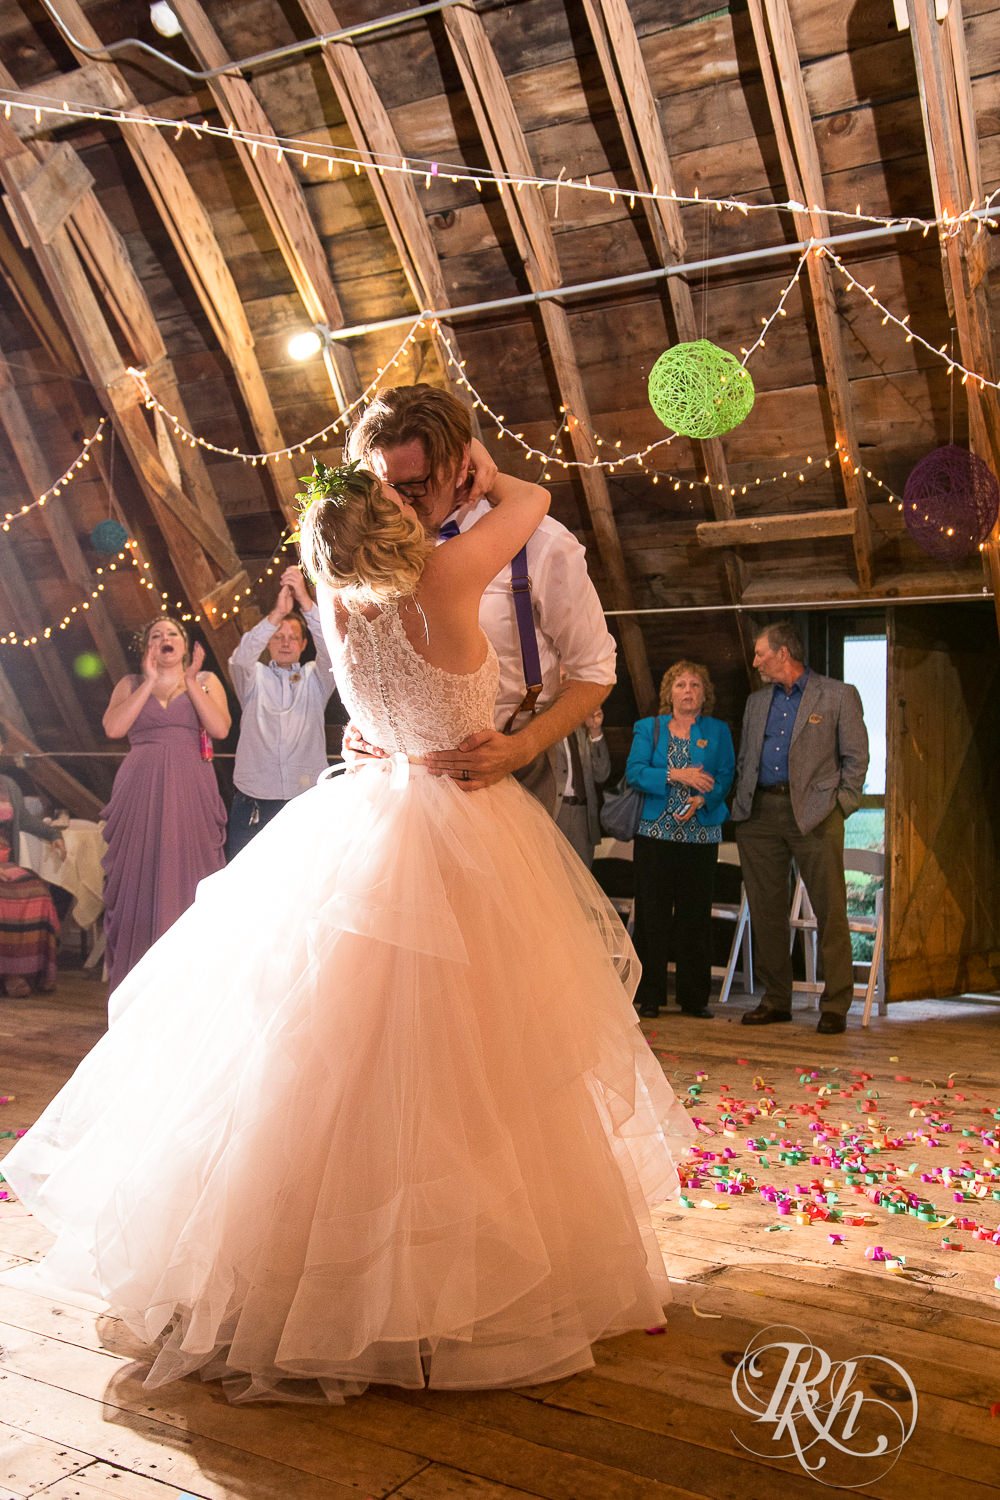 Bride and groom dance during wedding reception at Coops Event Barn in Dodge Center, Minnesota.